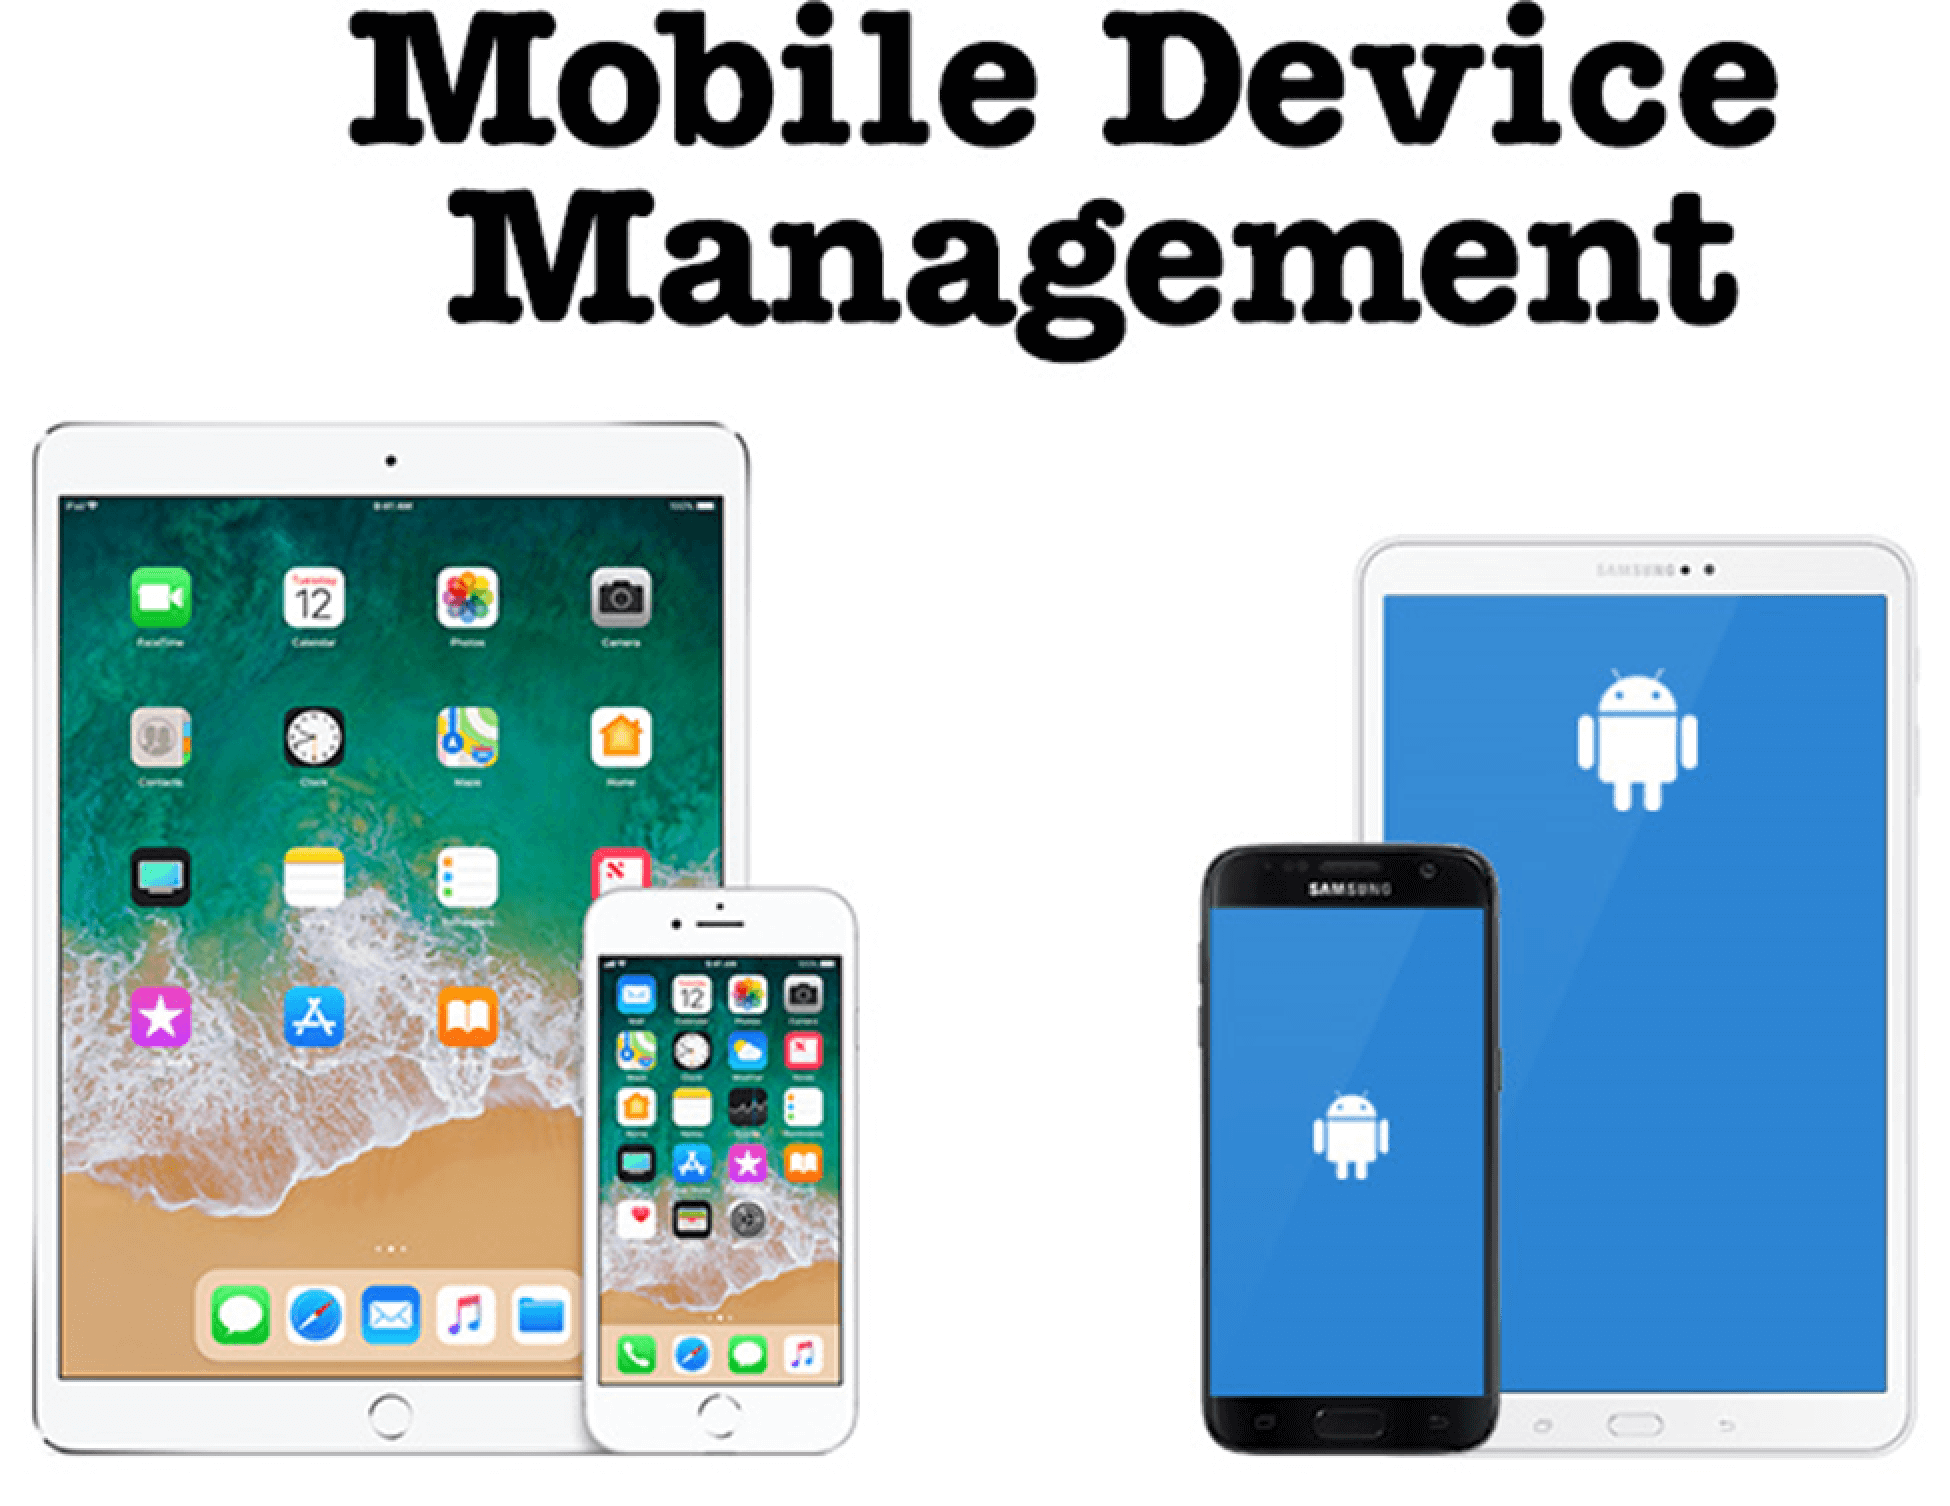 Management of mobile devices and mobile applications